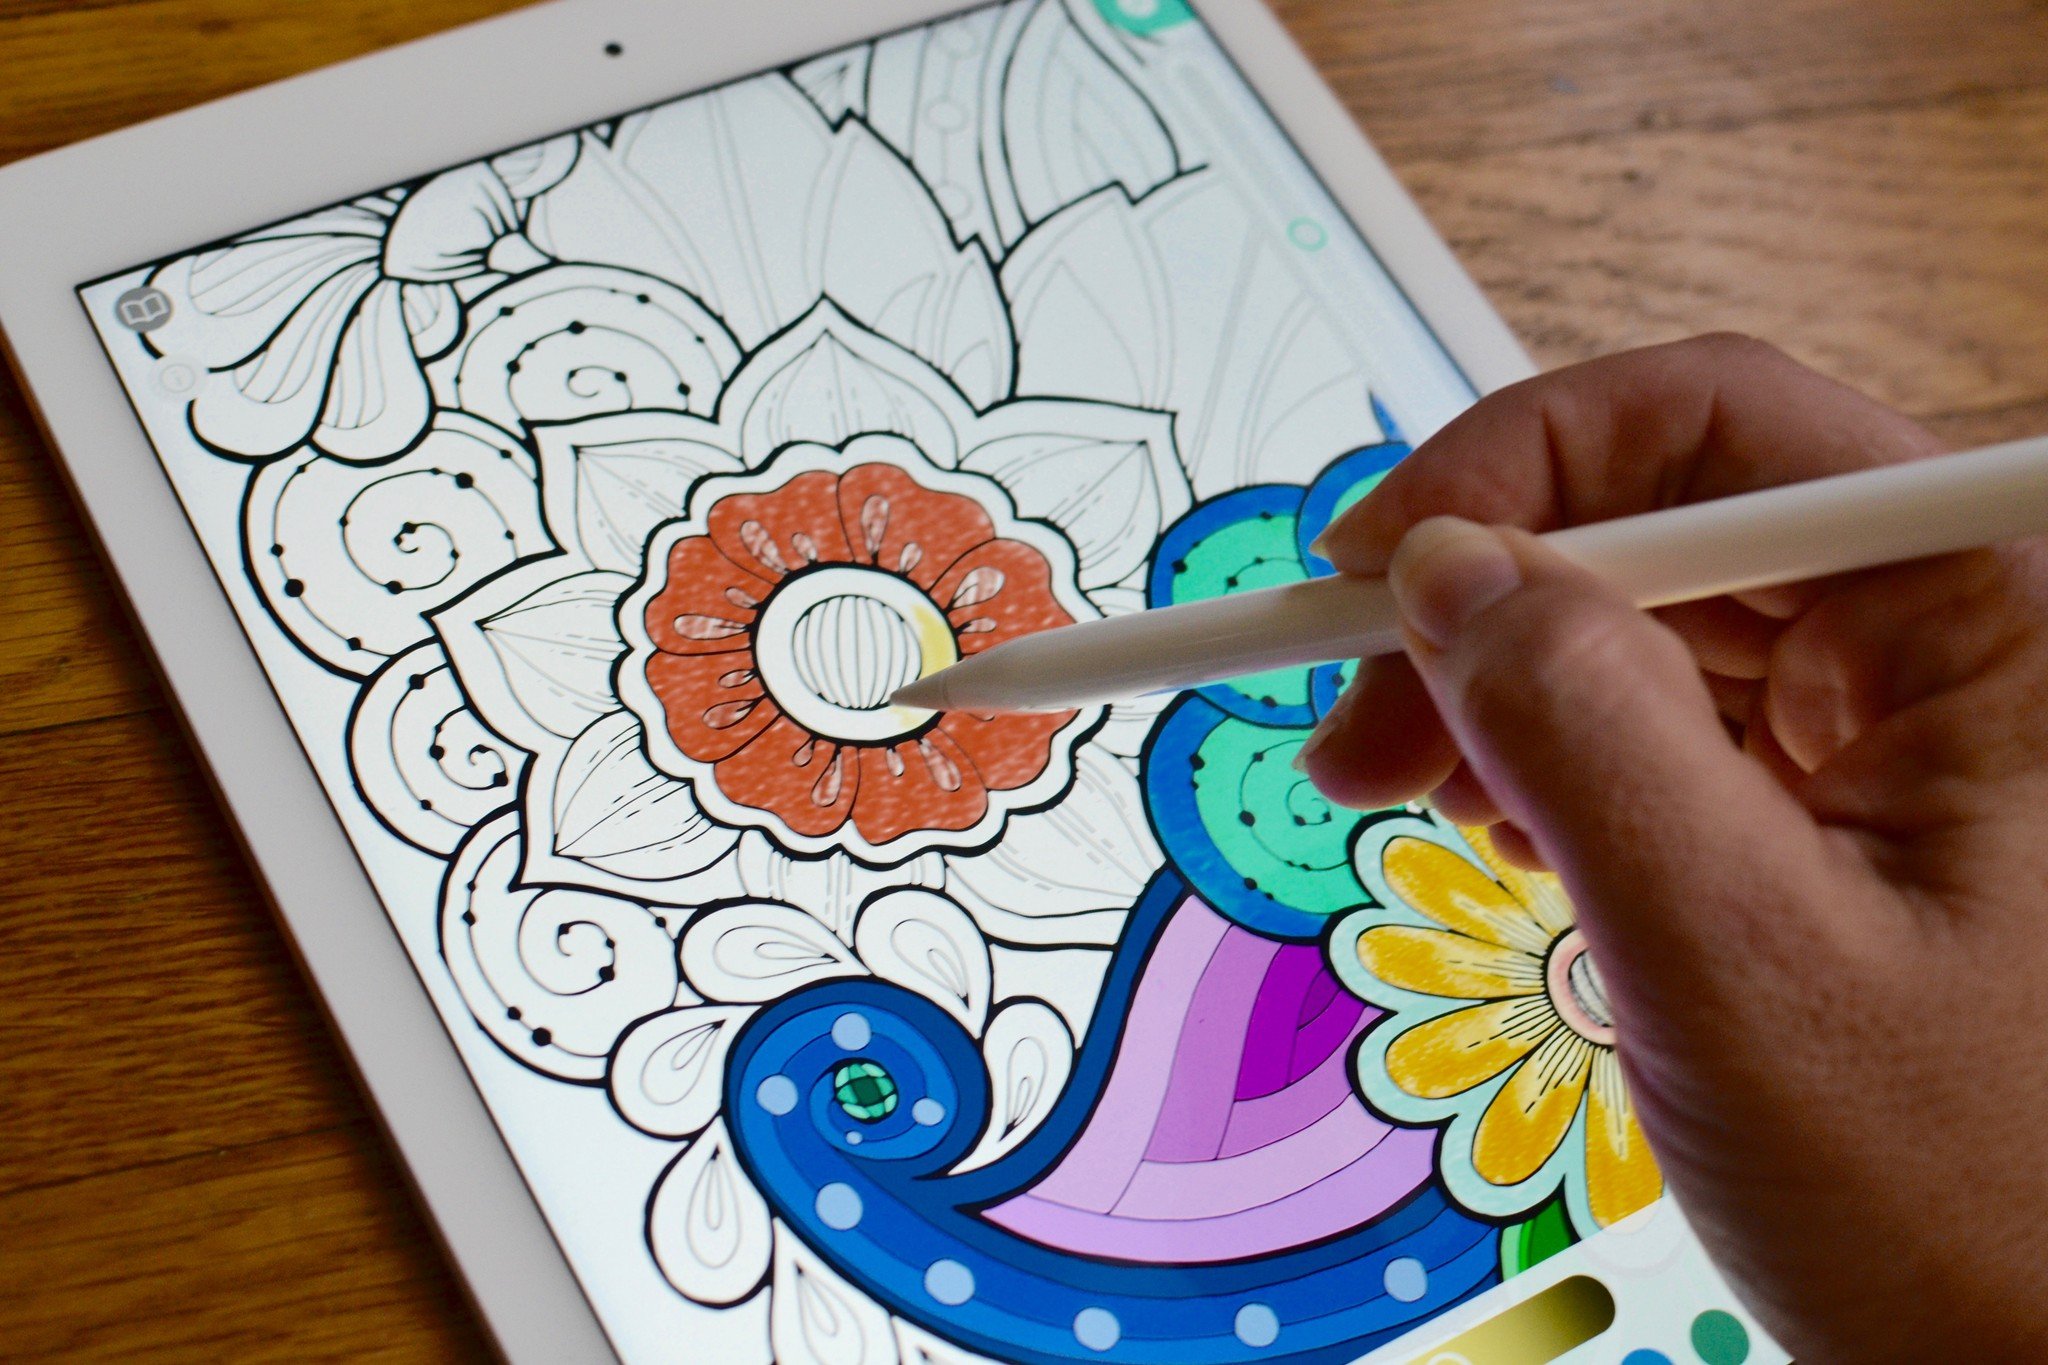 Download Best Coloring Books for Adults on iPad in 2020 | iMore